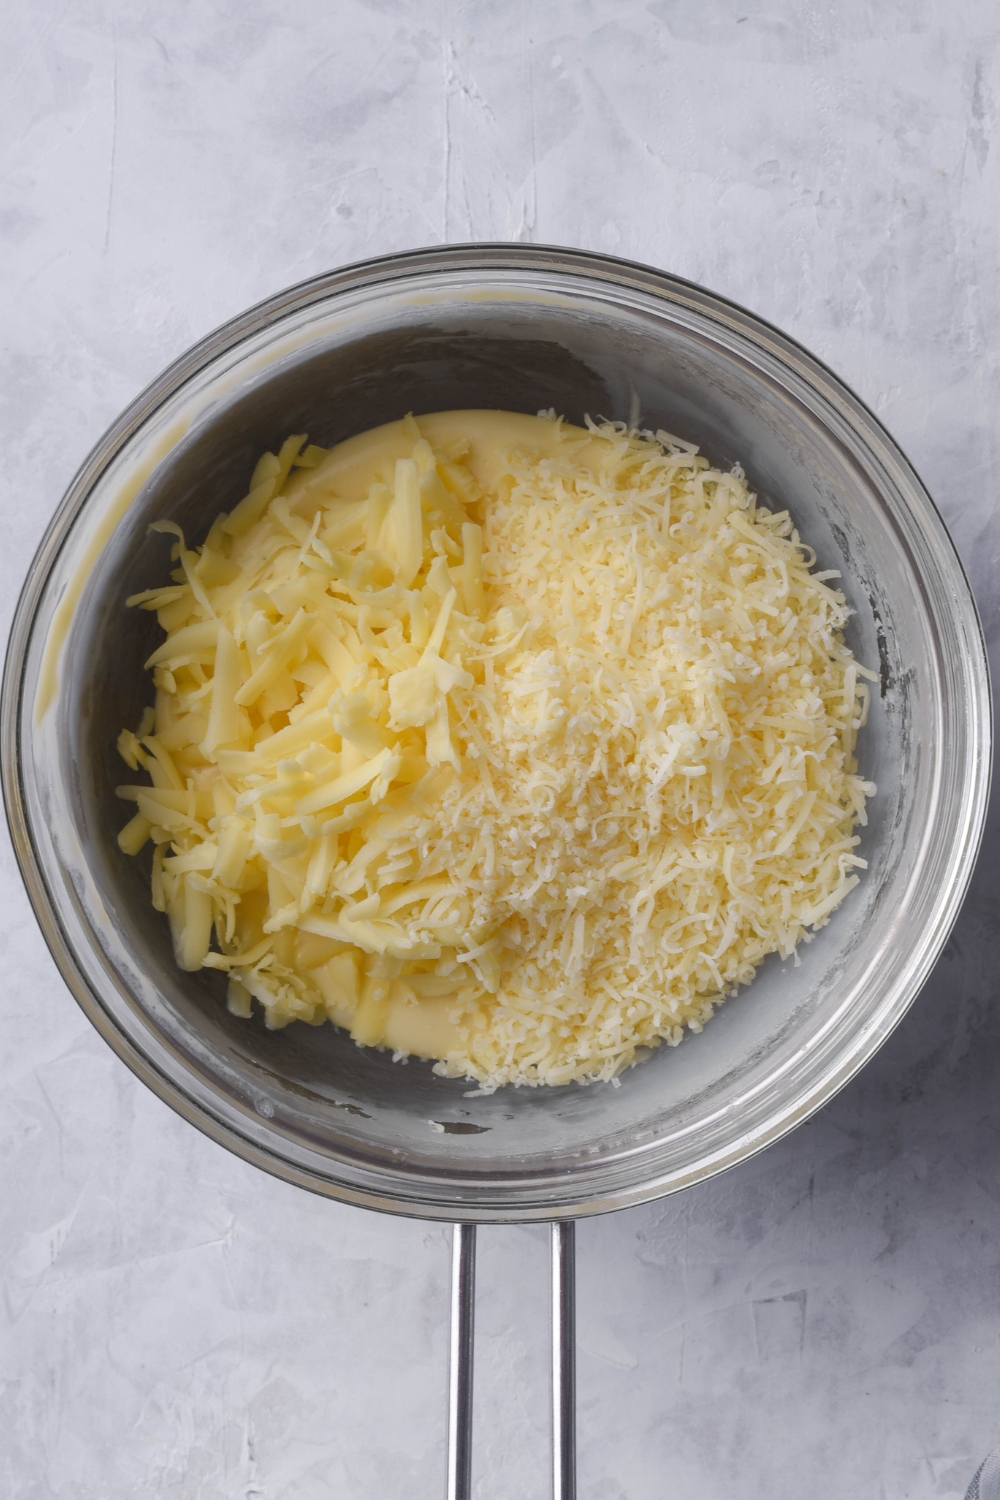 A double boiler with shredded cheeses being added to melted white american cheese mix.